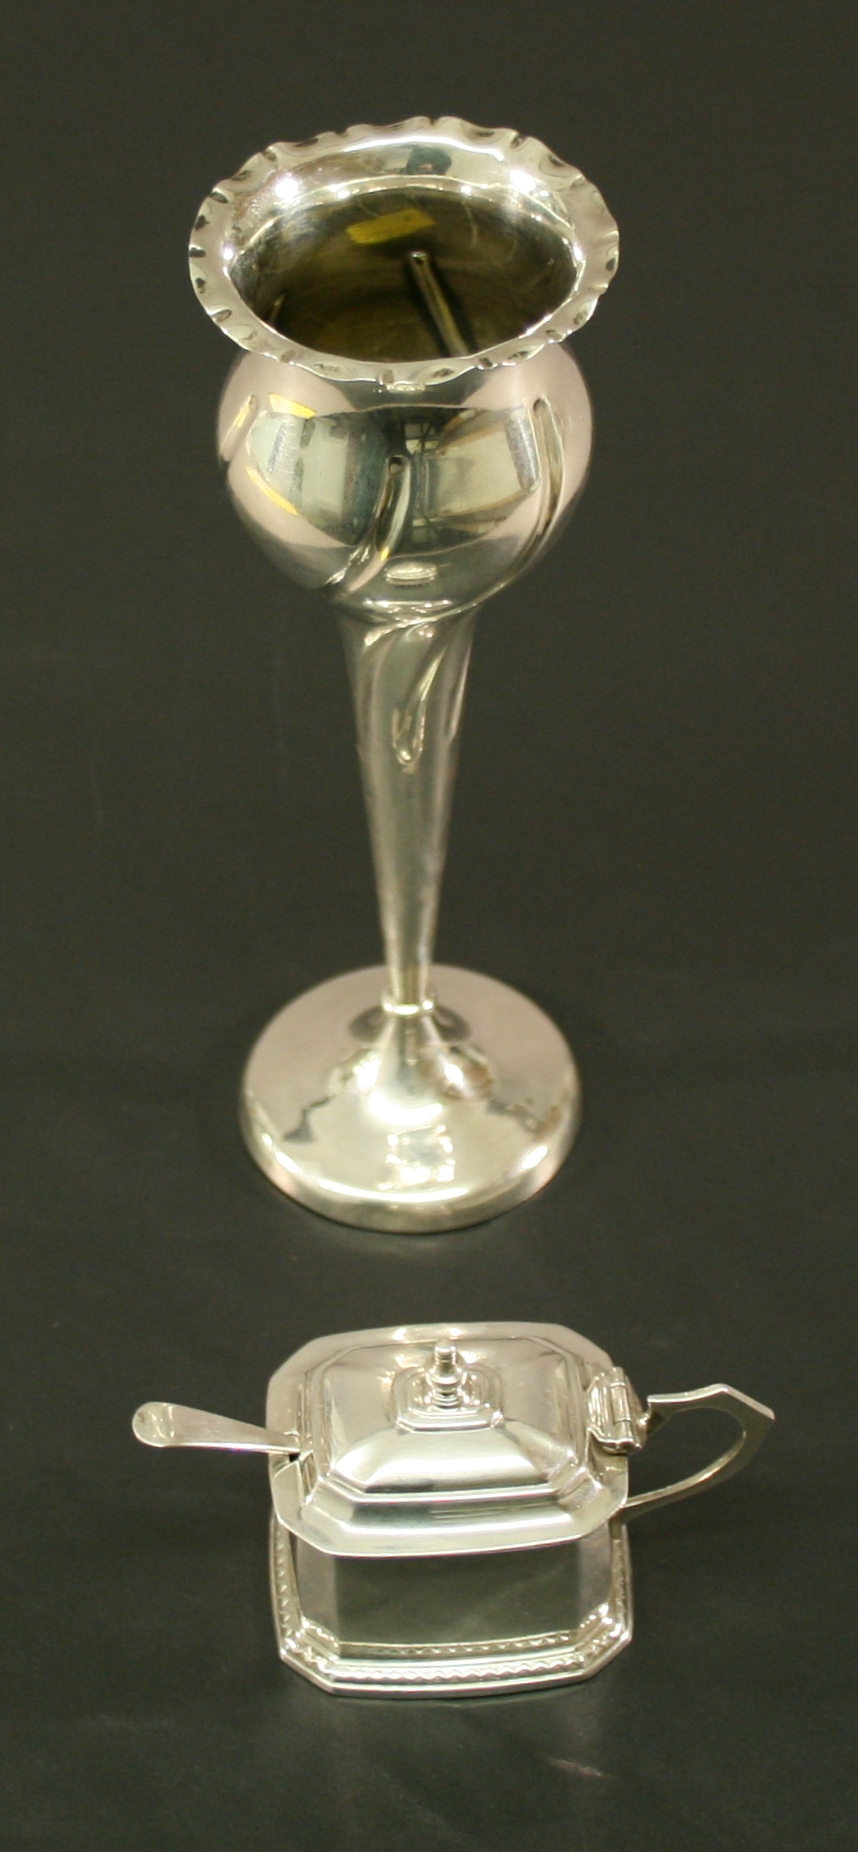 AN EDWARDIAN ART NOUVEAU SILVER TULIP VASE of spirally fluted organic form with tapering stem and